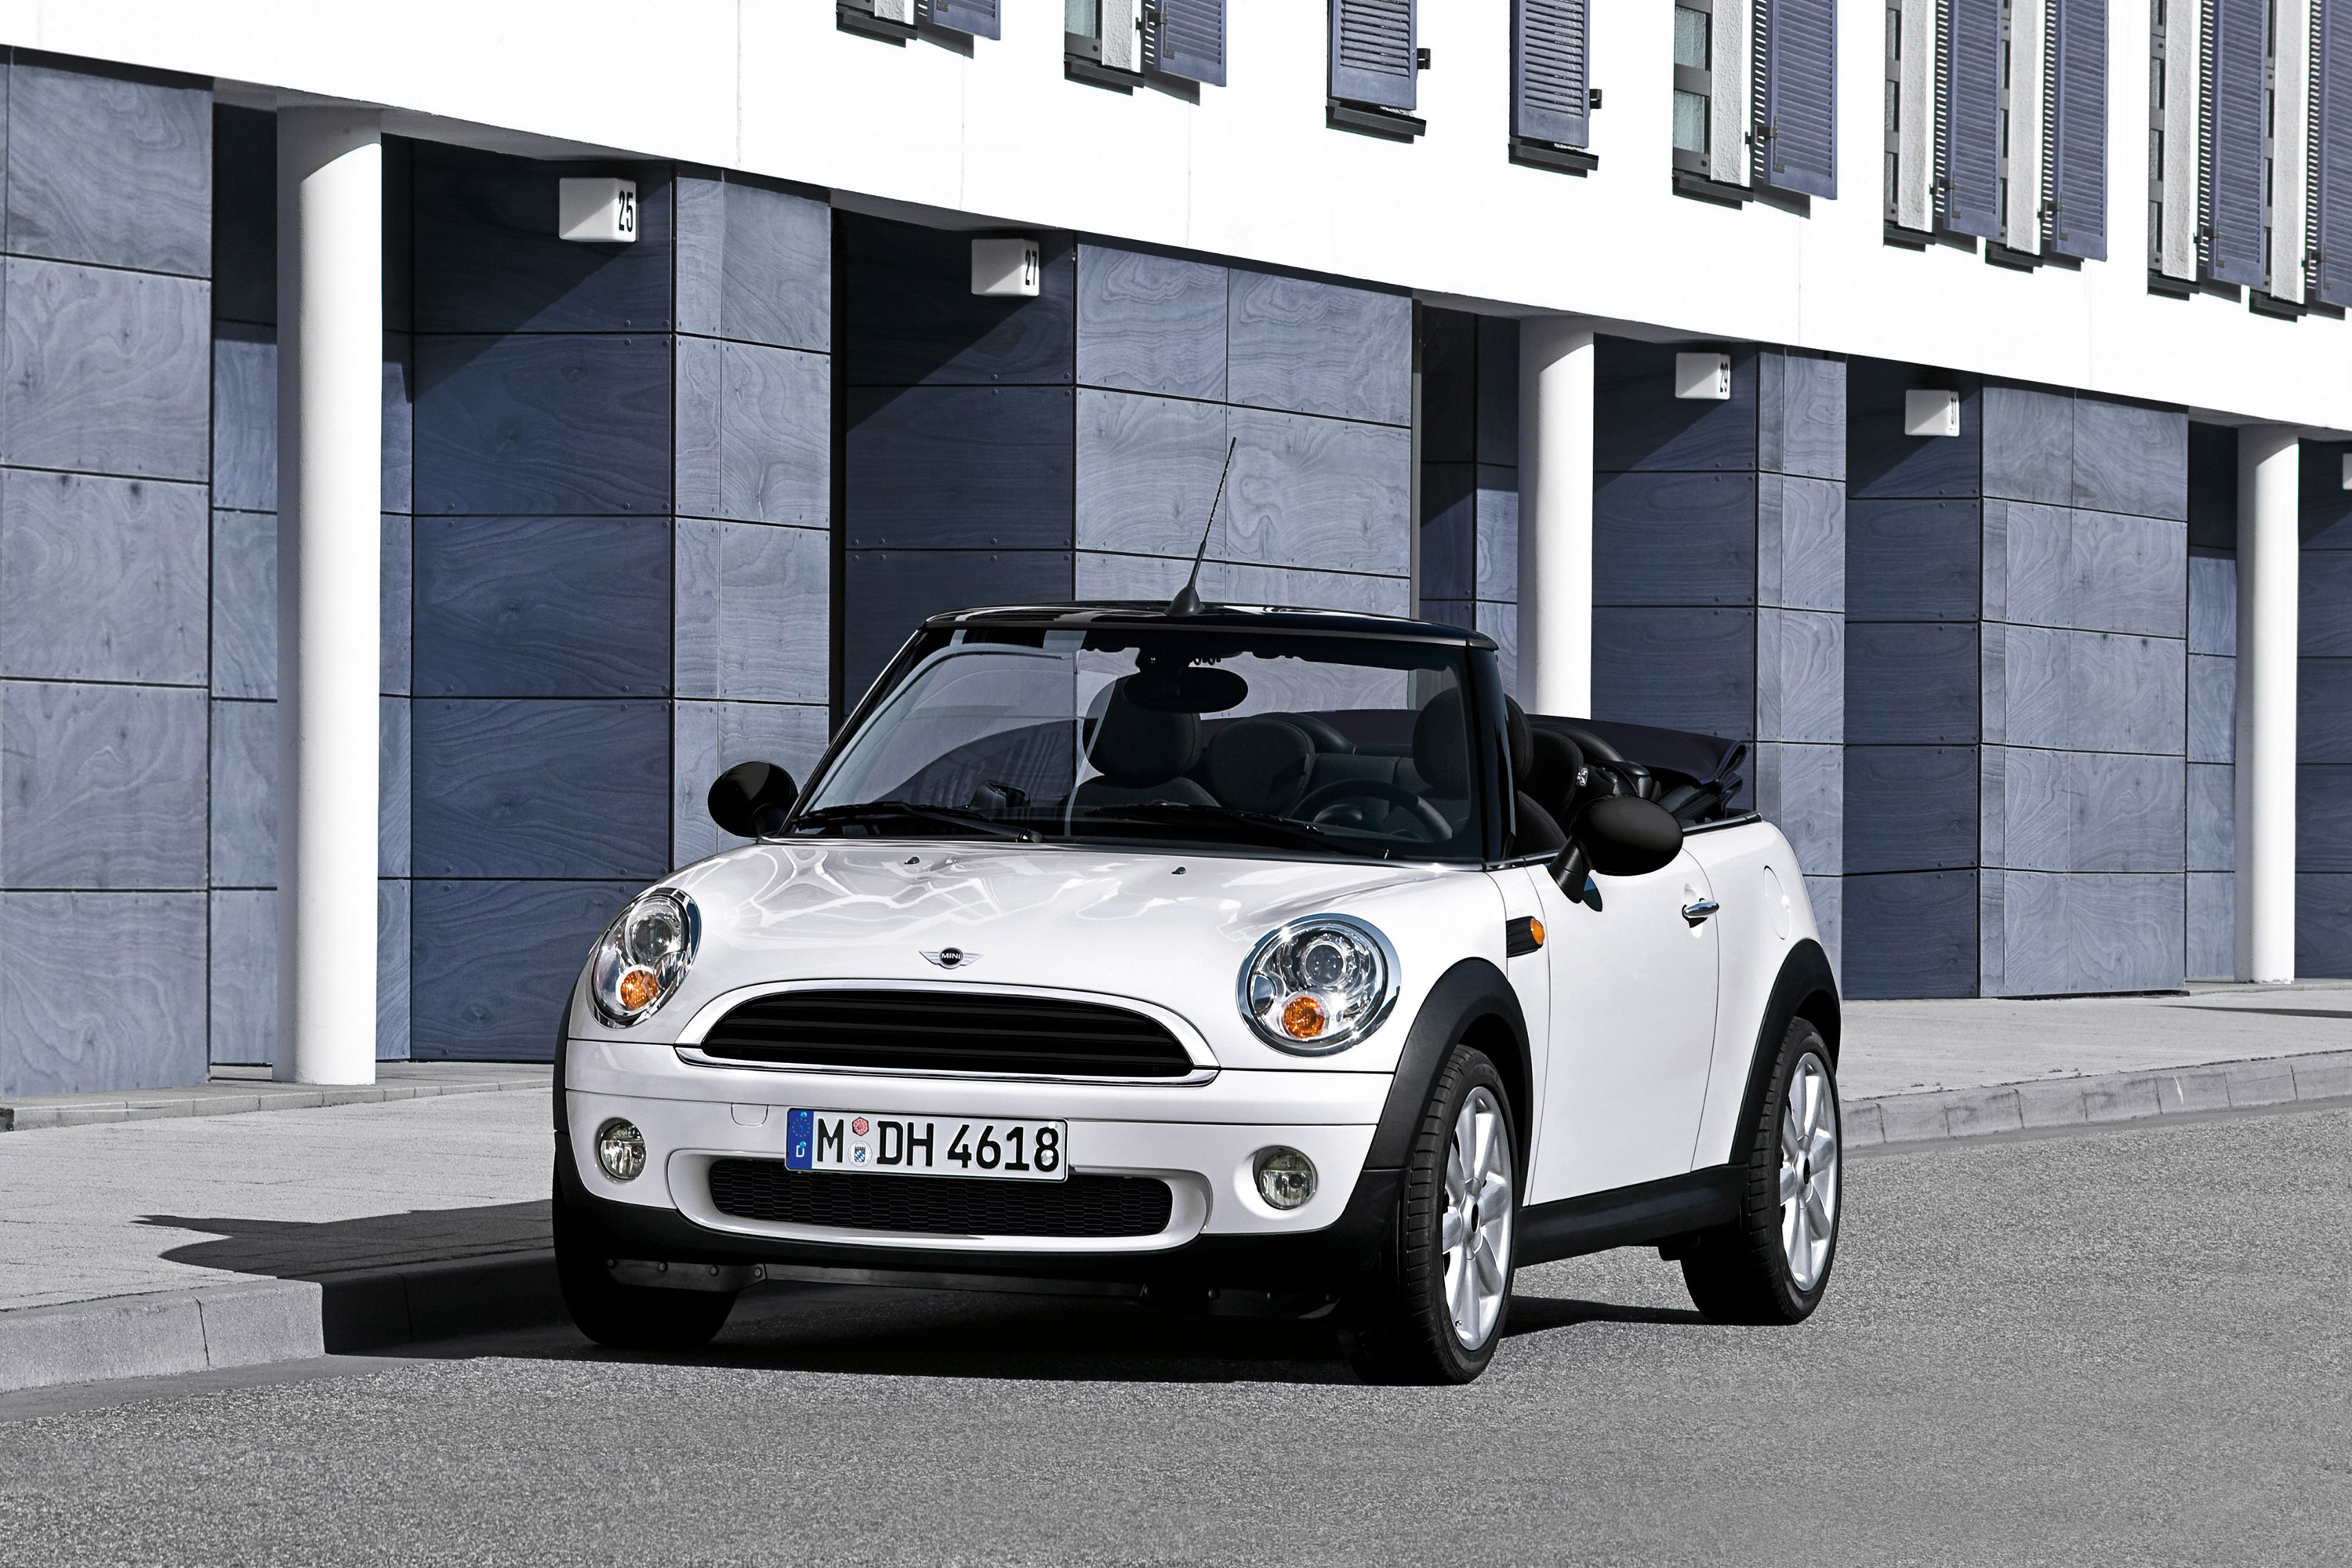 Mini One Cabrio 03 | HD Wallpapers online